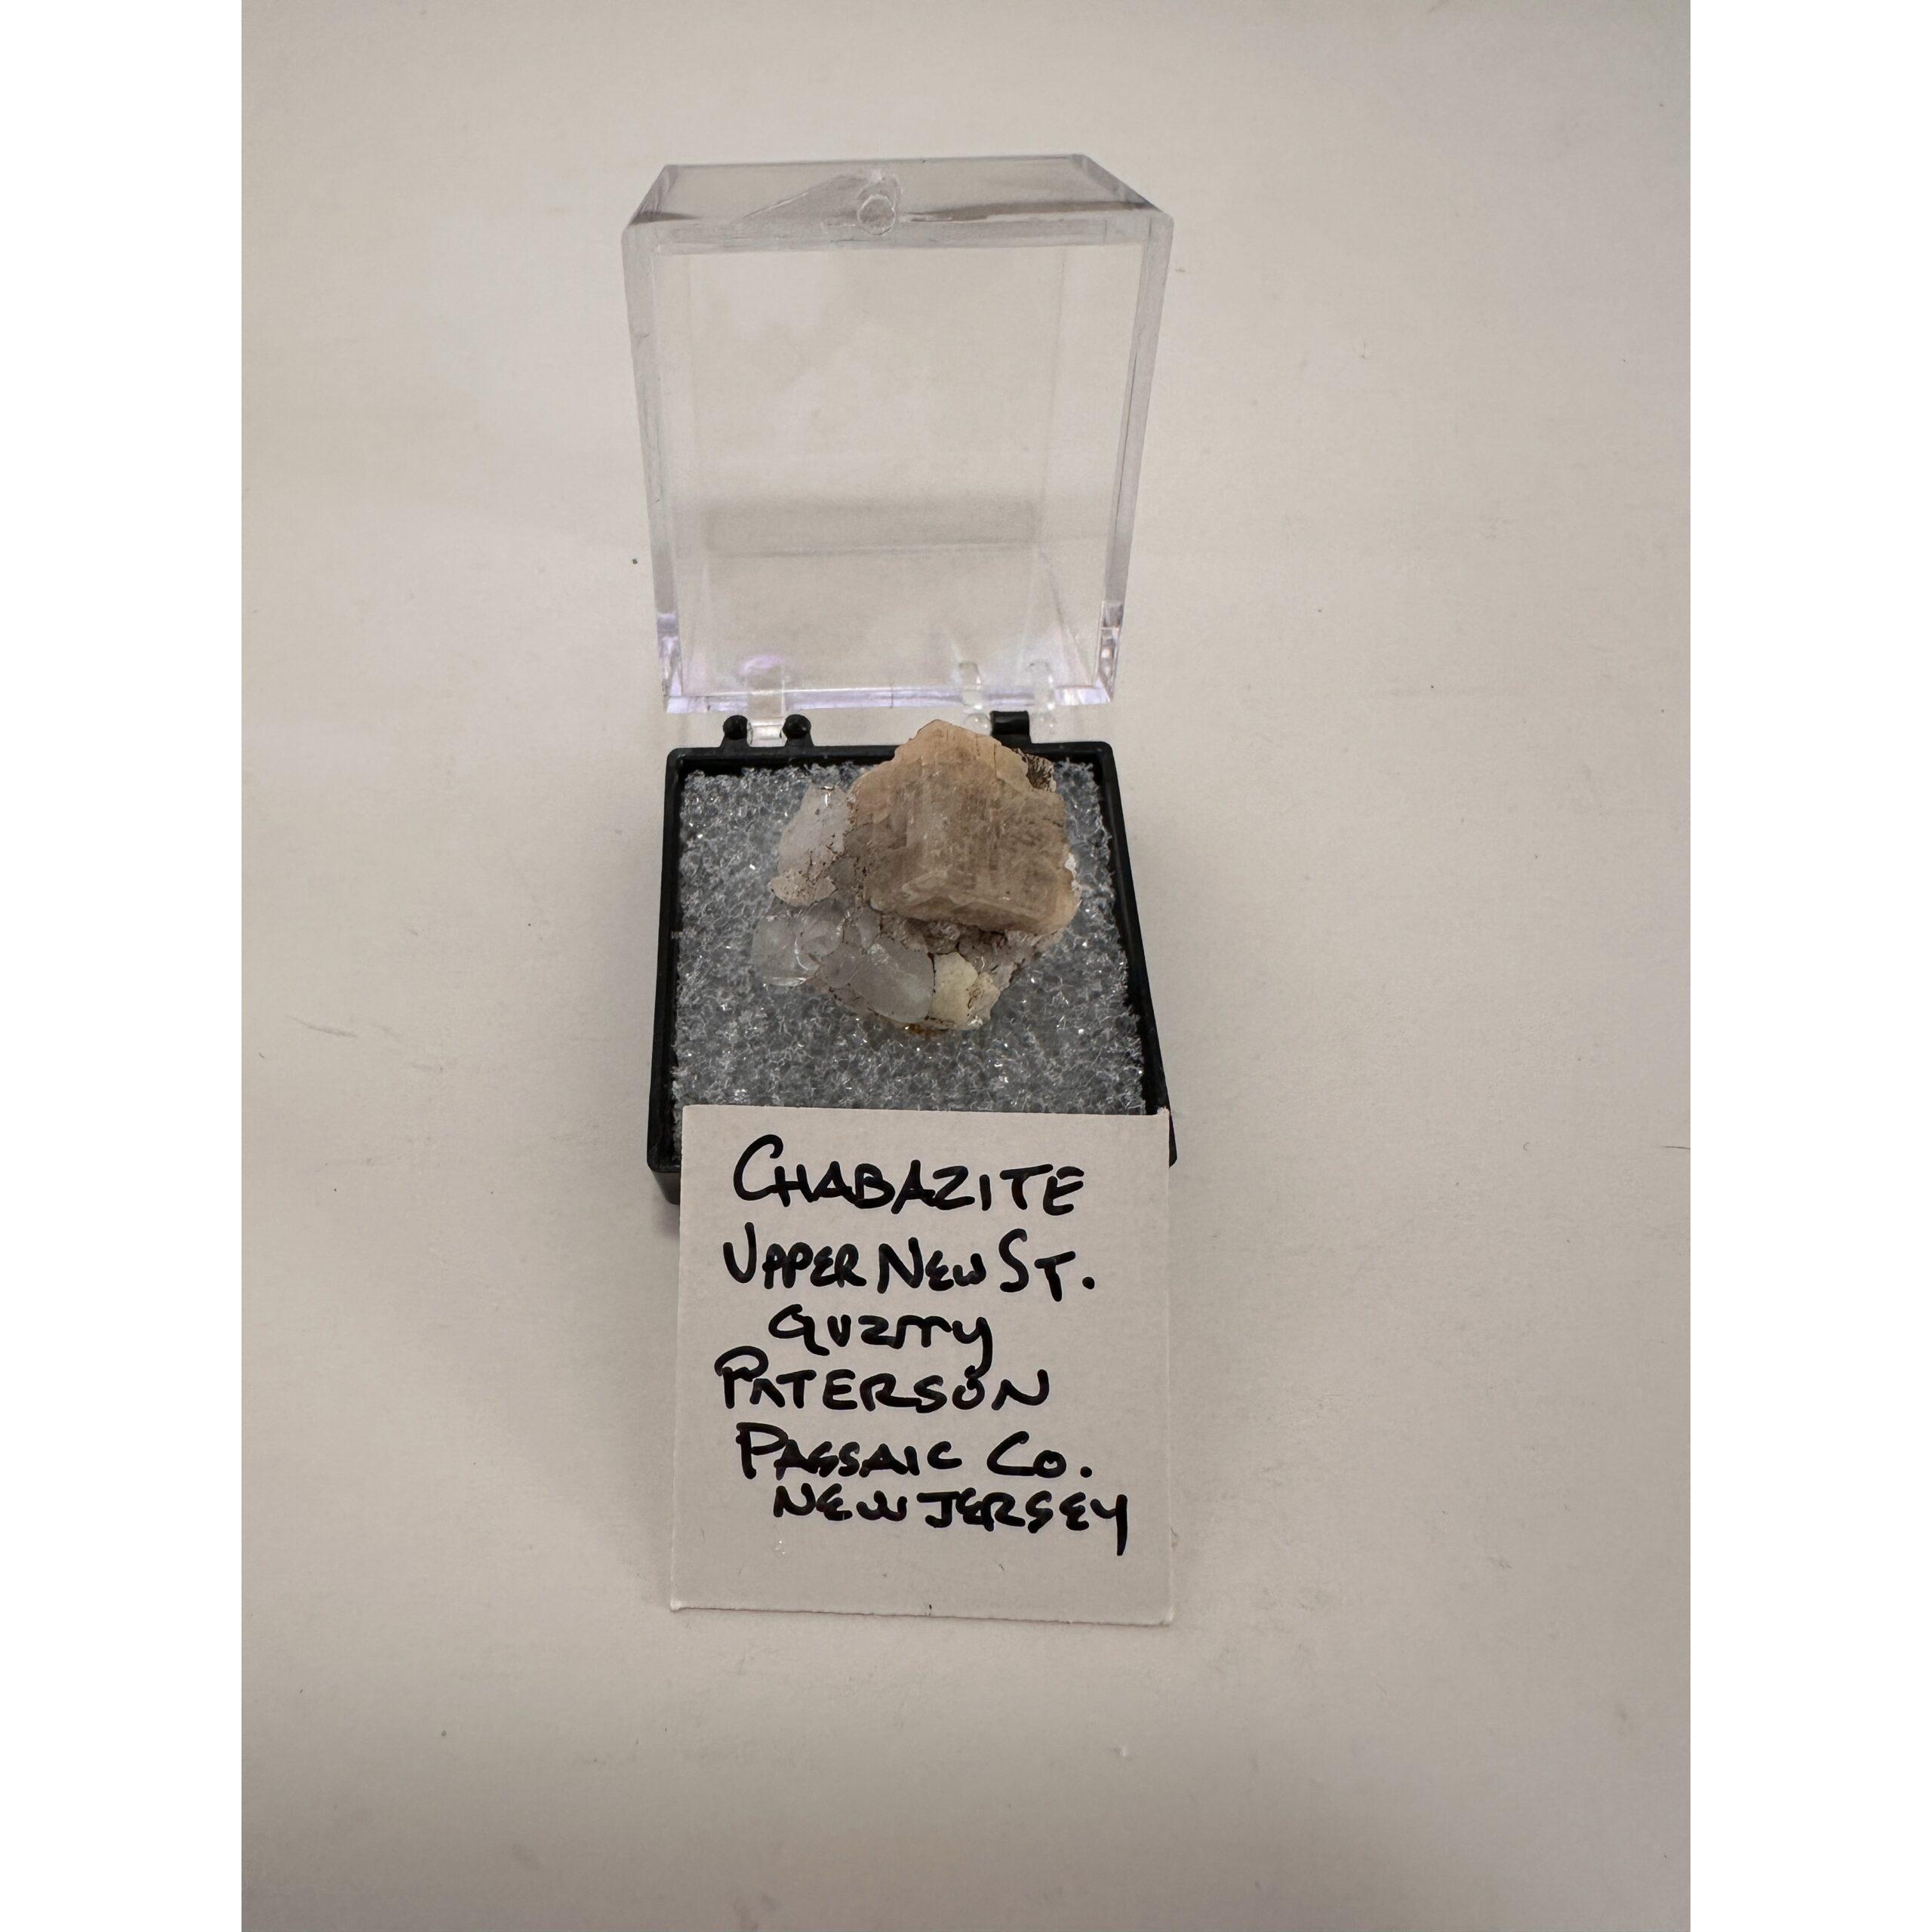 Chabazite thumbnail mineral, New Jersey Prehistoric Online